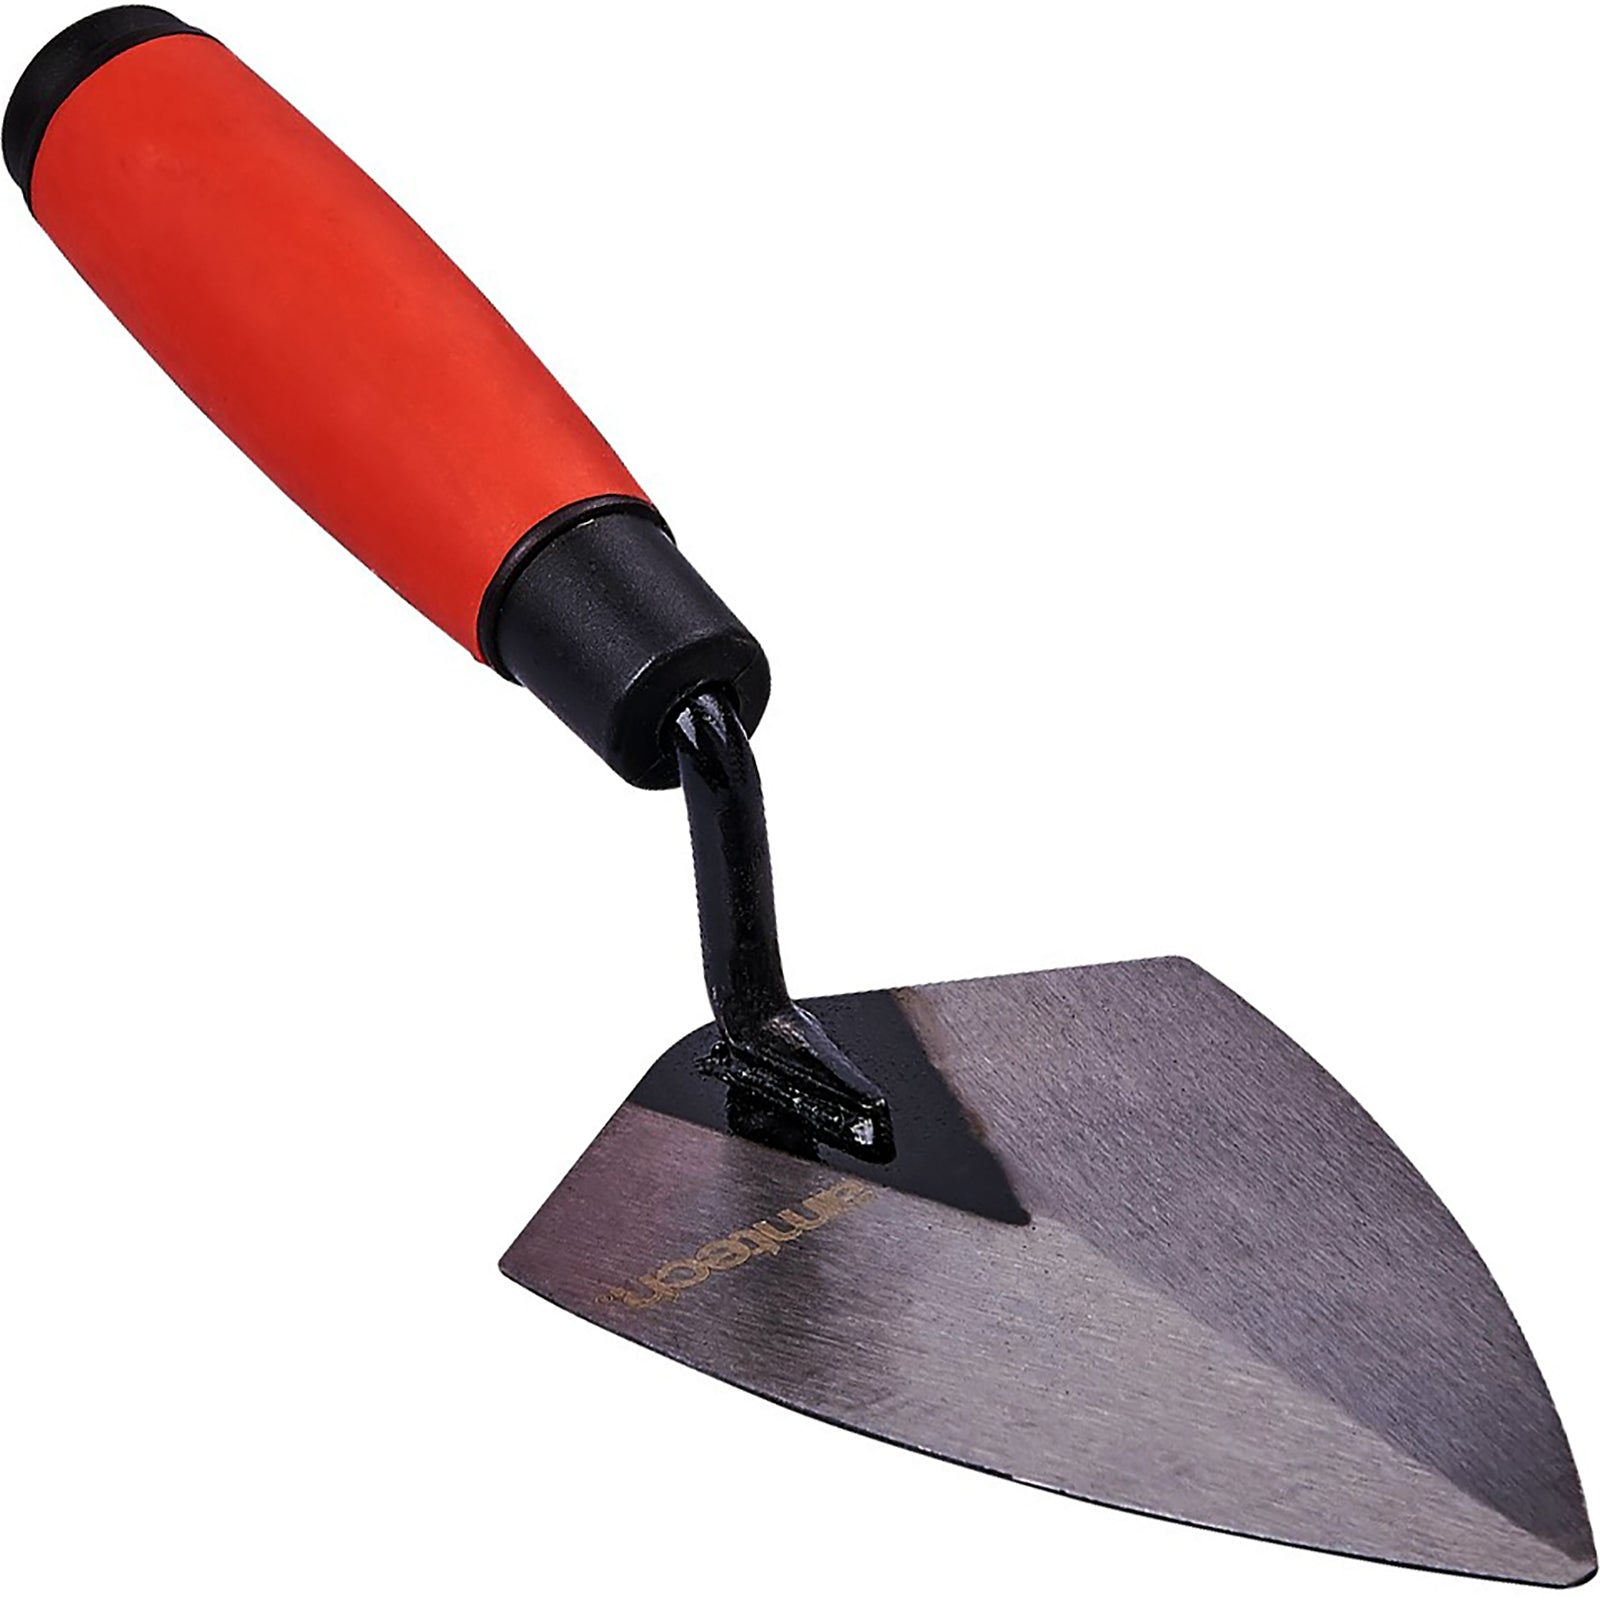 Amtech 150mm (6") Pointing Trowel with Soft Grip Handle